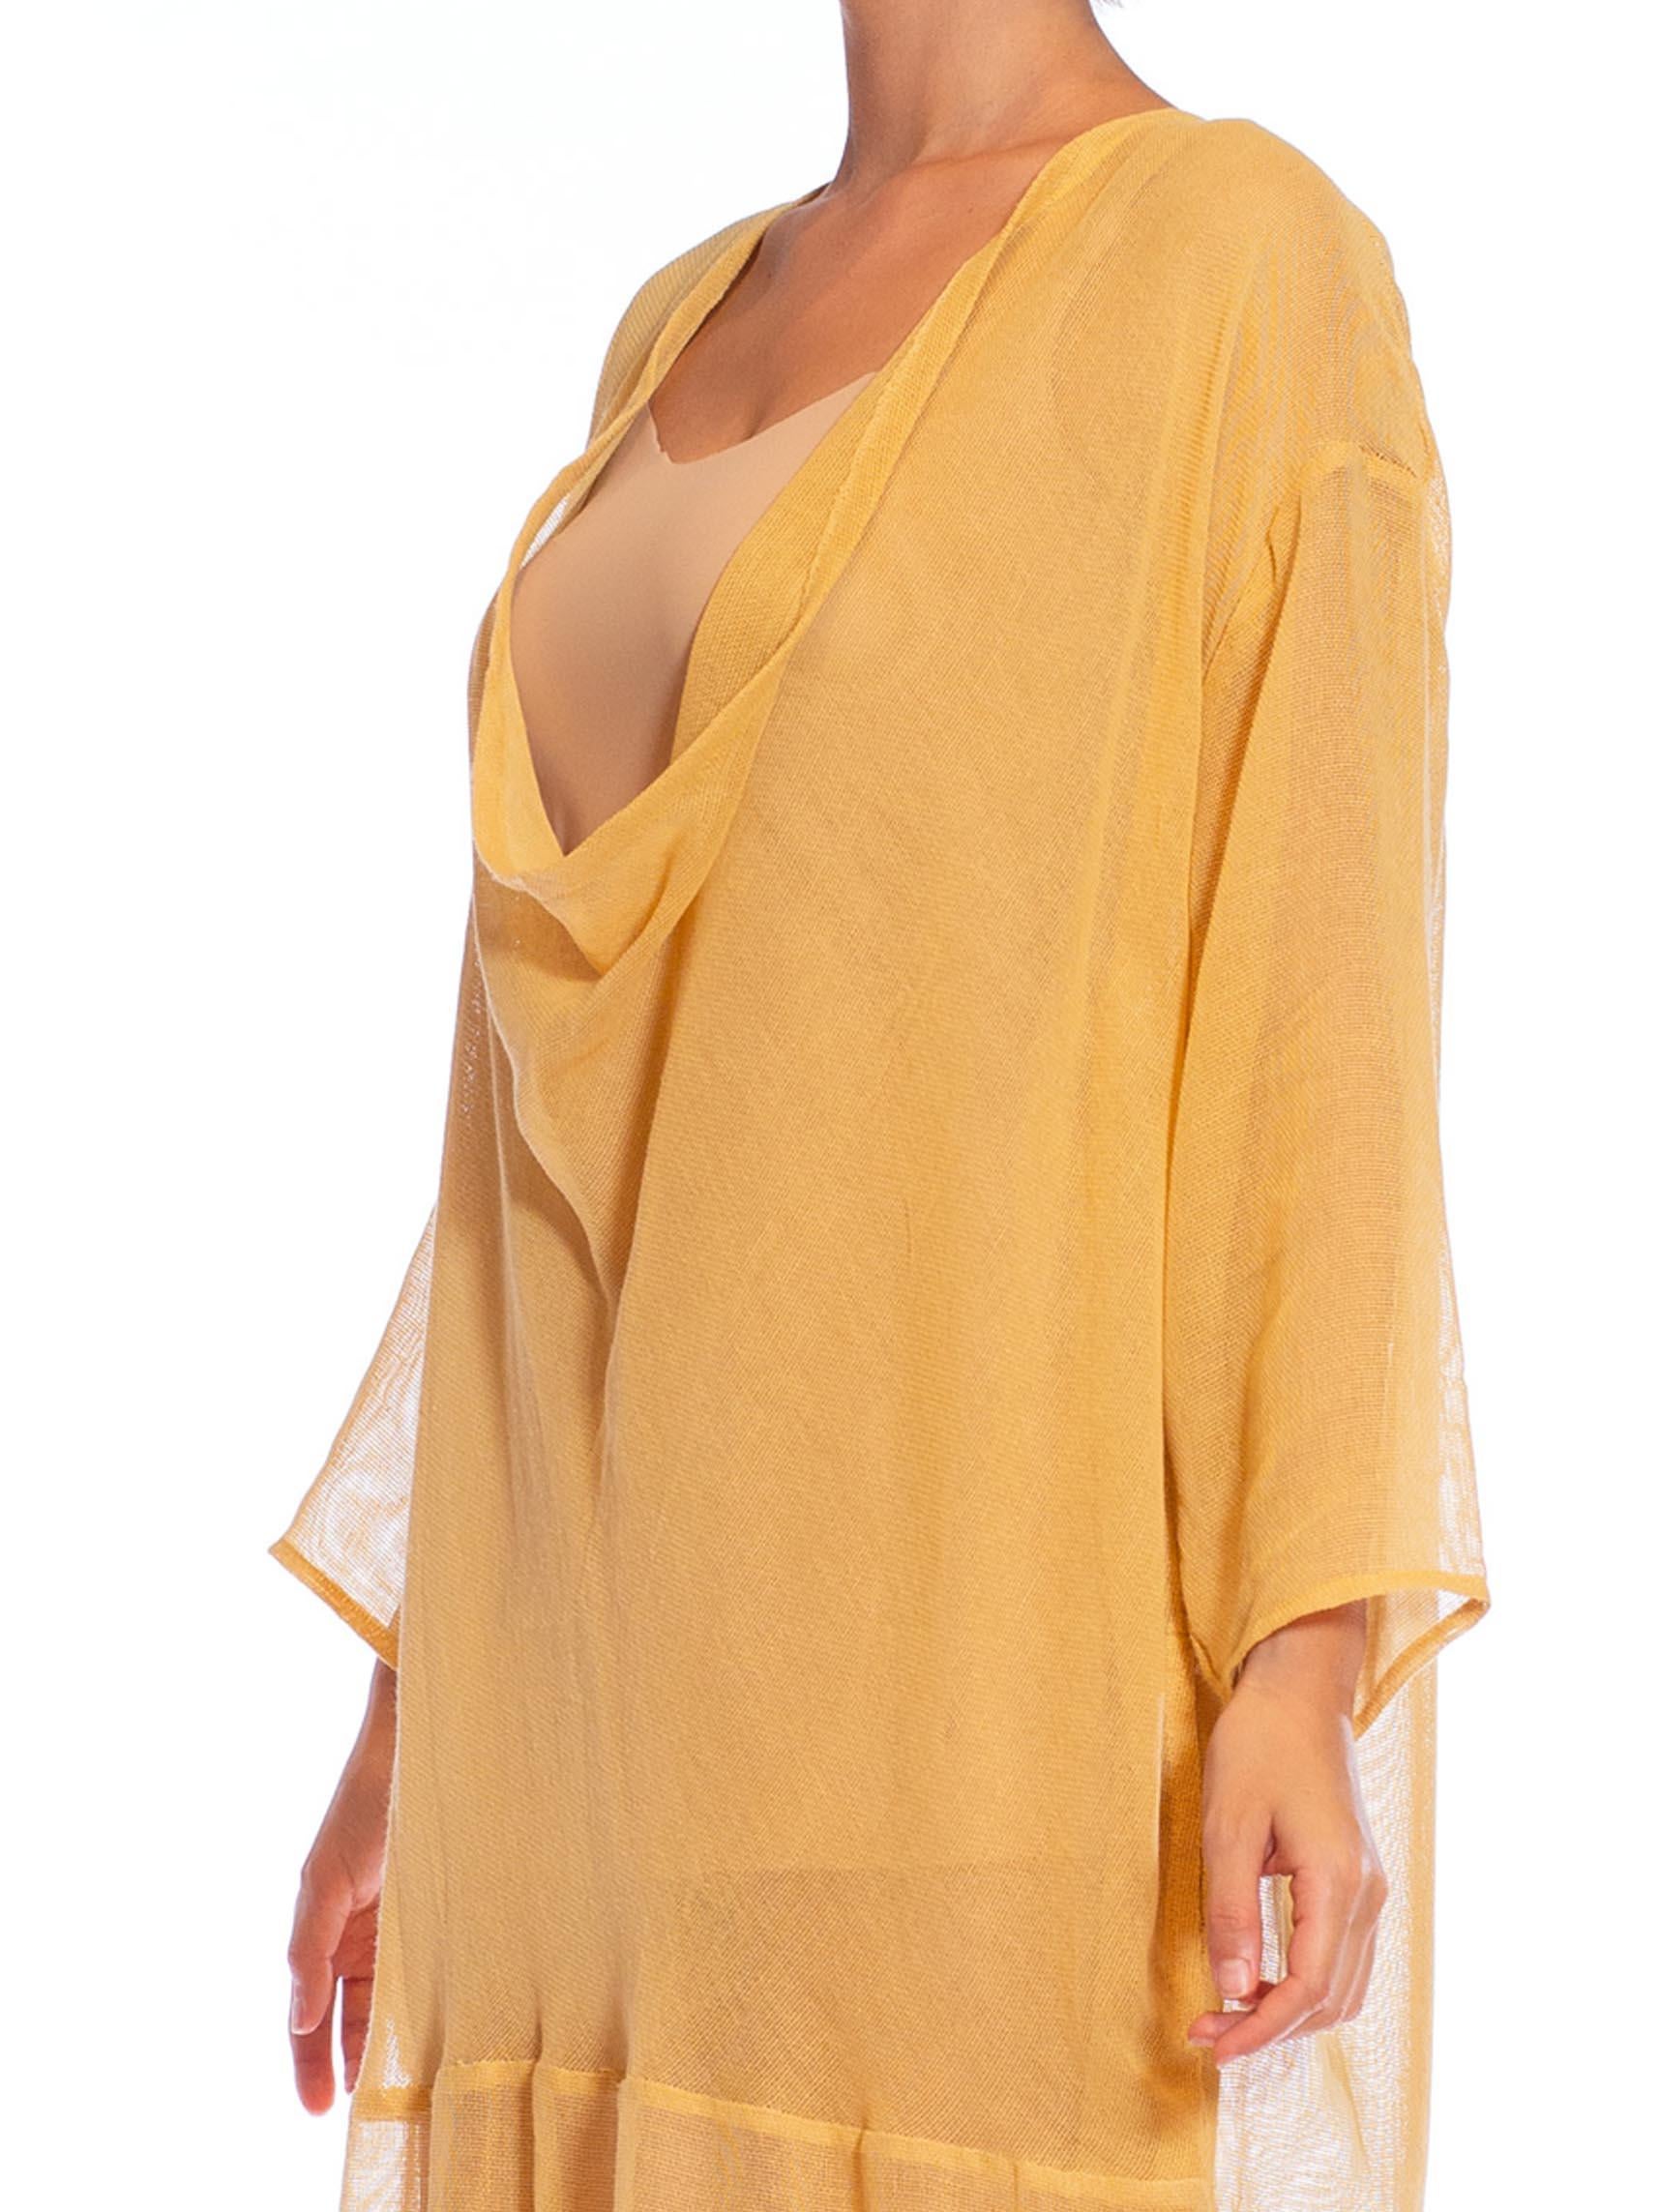 MORPHEW COLLECTION Mustard Yellow Cotton Blend Gauze Unisex Cowl-Neck Tunic Top For Sale 4